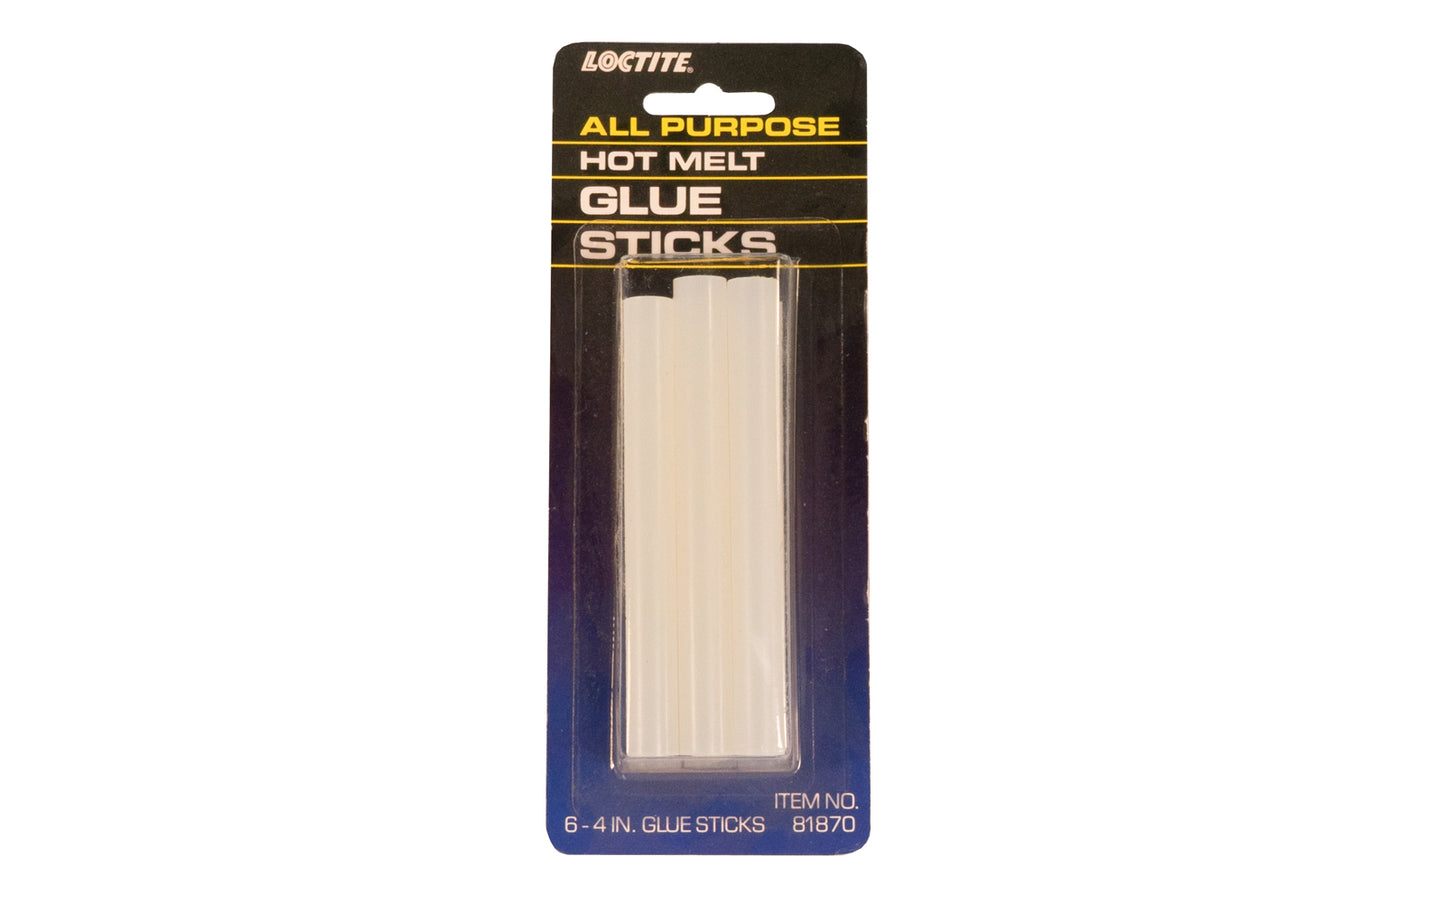 These Loctite all-purpose hot melt adhesive glue sticks can be used with standard hot melt glue guns. They are specially formualted for use in the repair & construction of furniture, toys, models, ceramics, canvas, leather & jewelry. Sold as 6 glue sticks in a pack. 079340818705. Model 81870